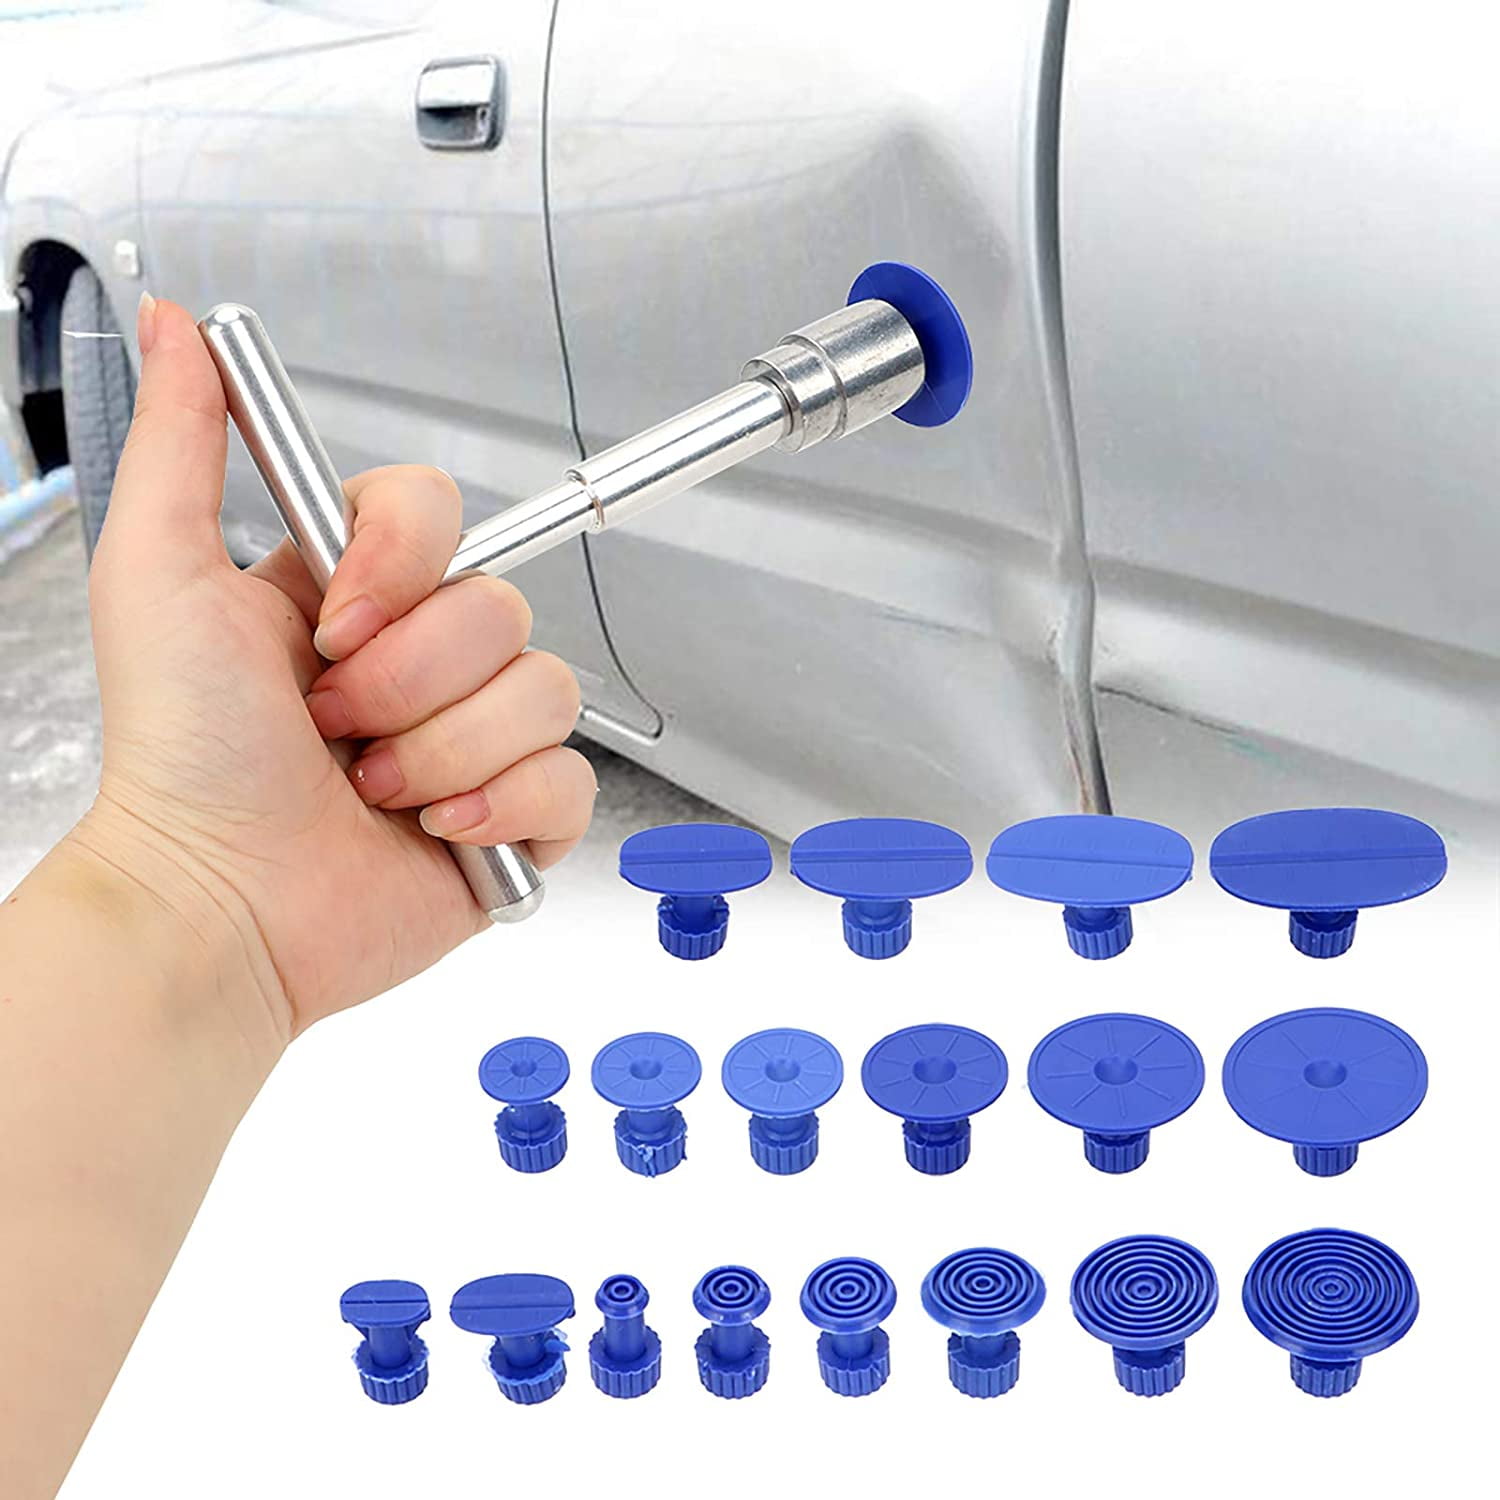 5pc Puller Tabs Car Body Paintless Dent PDR Remover Pulling DIY Repair Hand Tool 